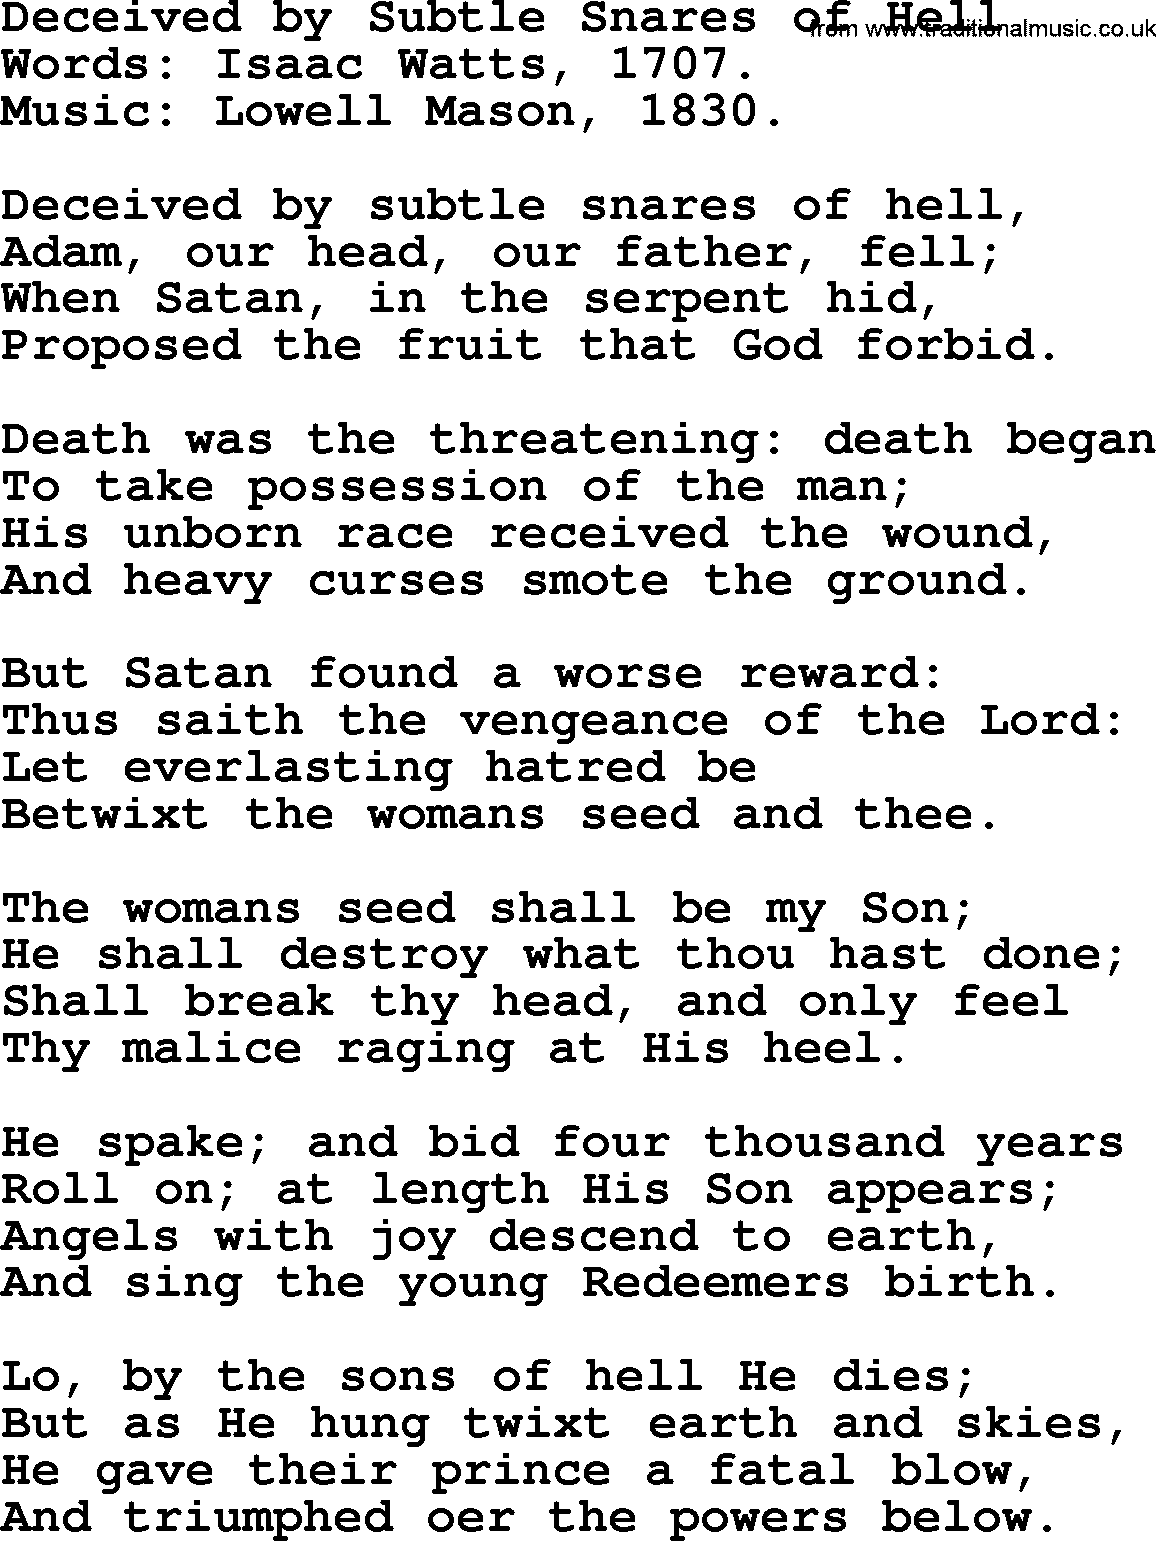 Isaac Watts Christian hymn: Deceived by Subtle Snares of Hell- lyricss